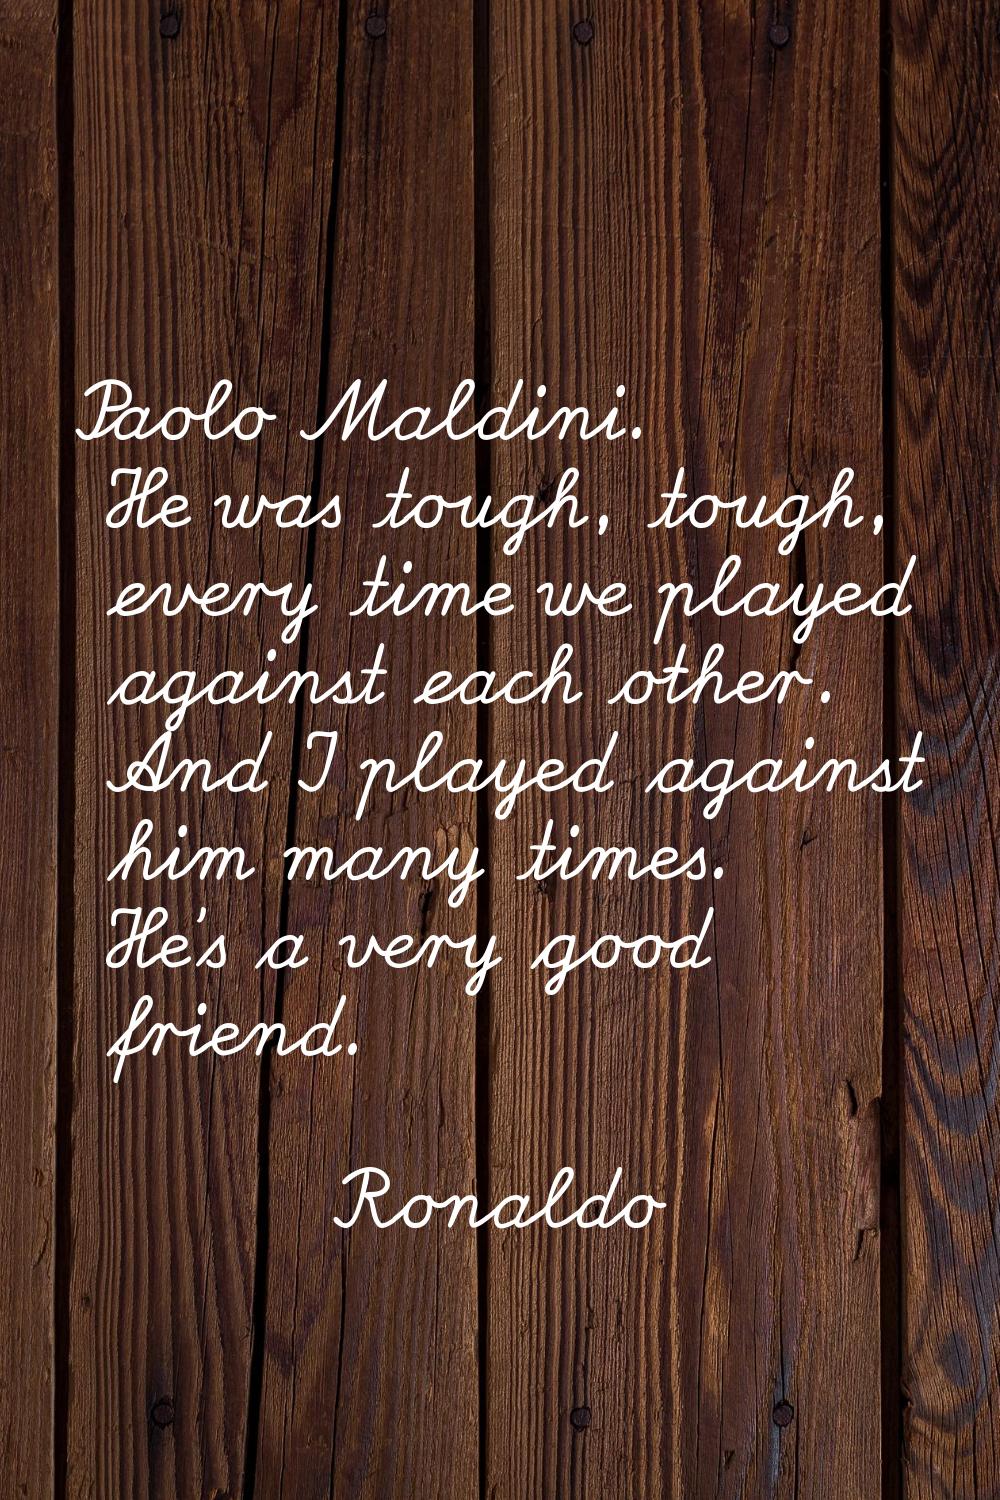 Paolo Maldini. He was tough, tough, every time we played against each other. And I played against h